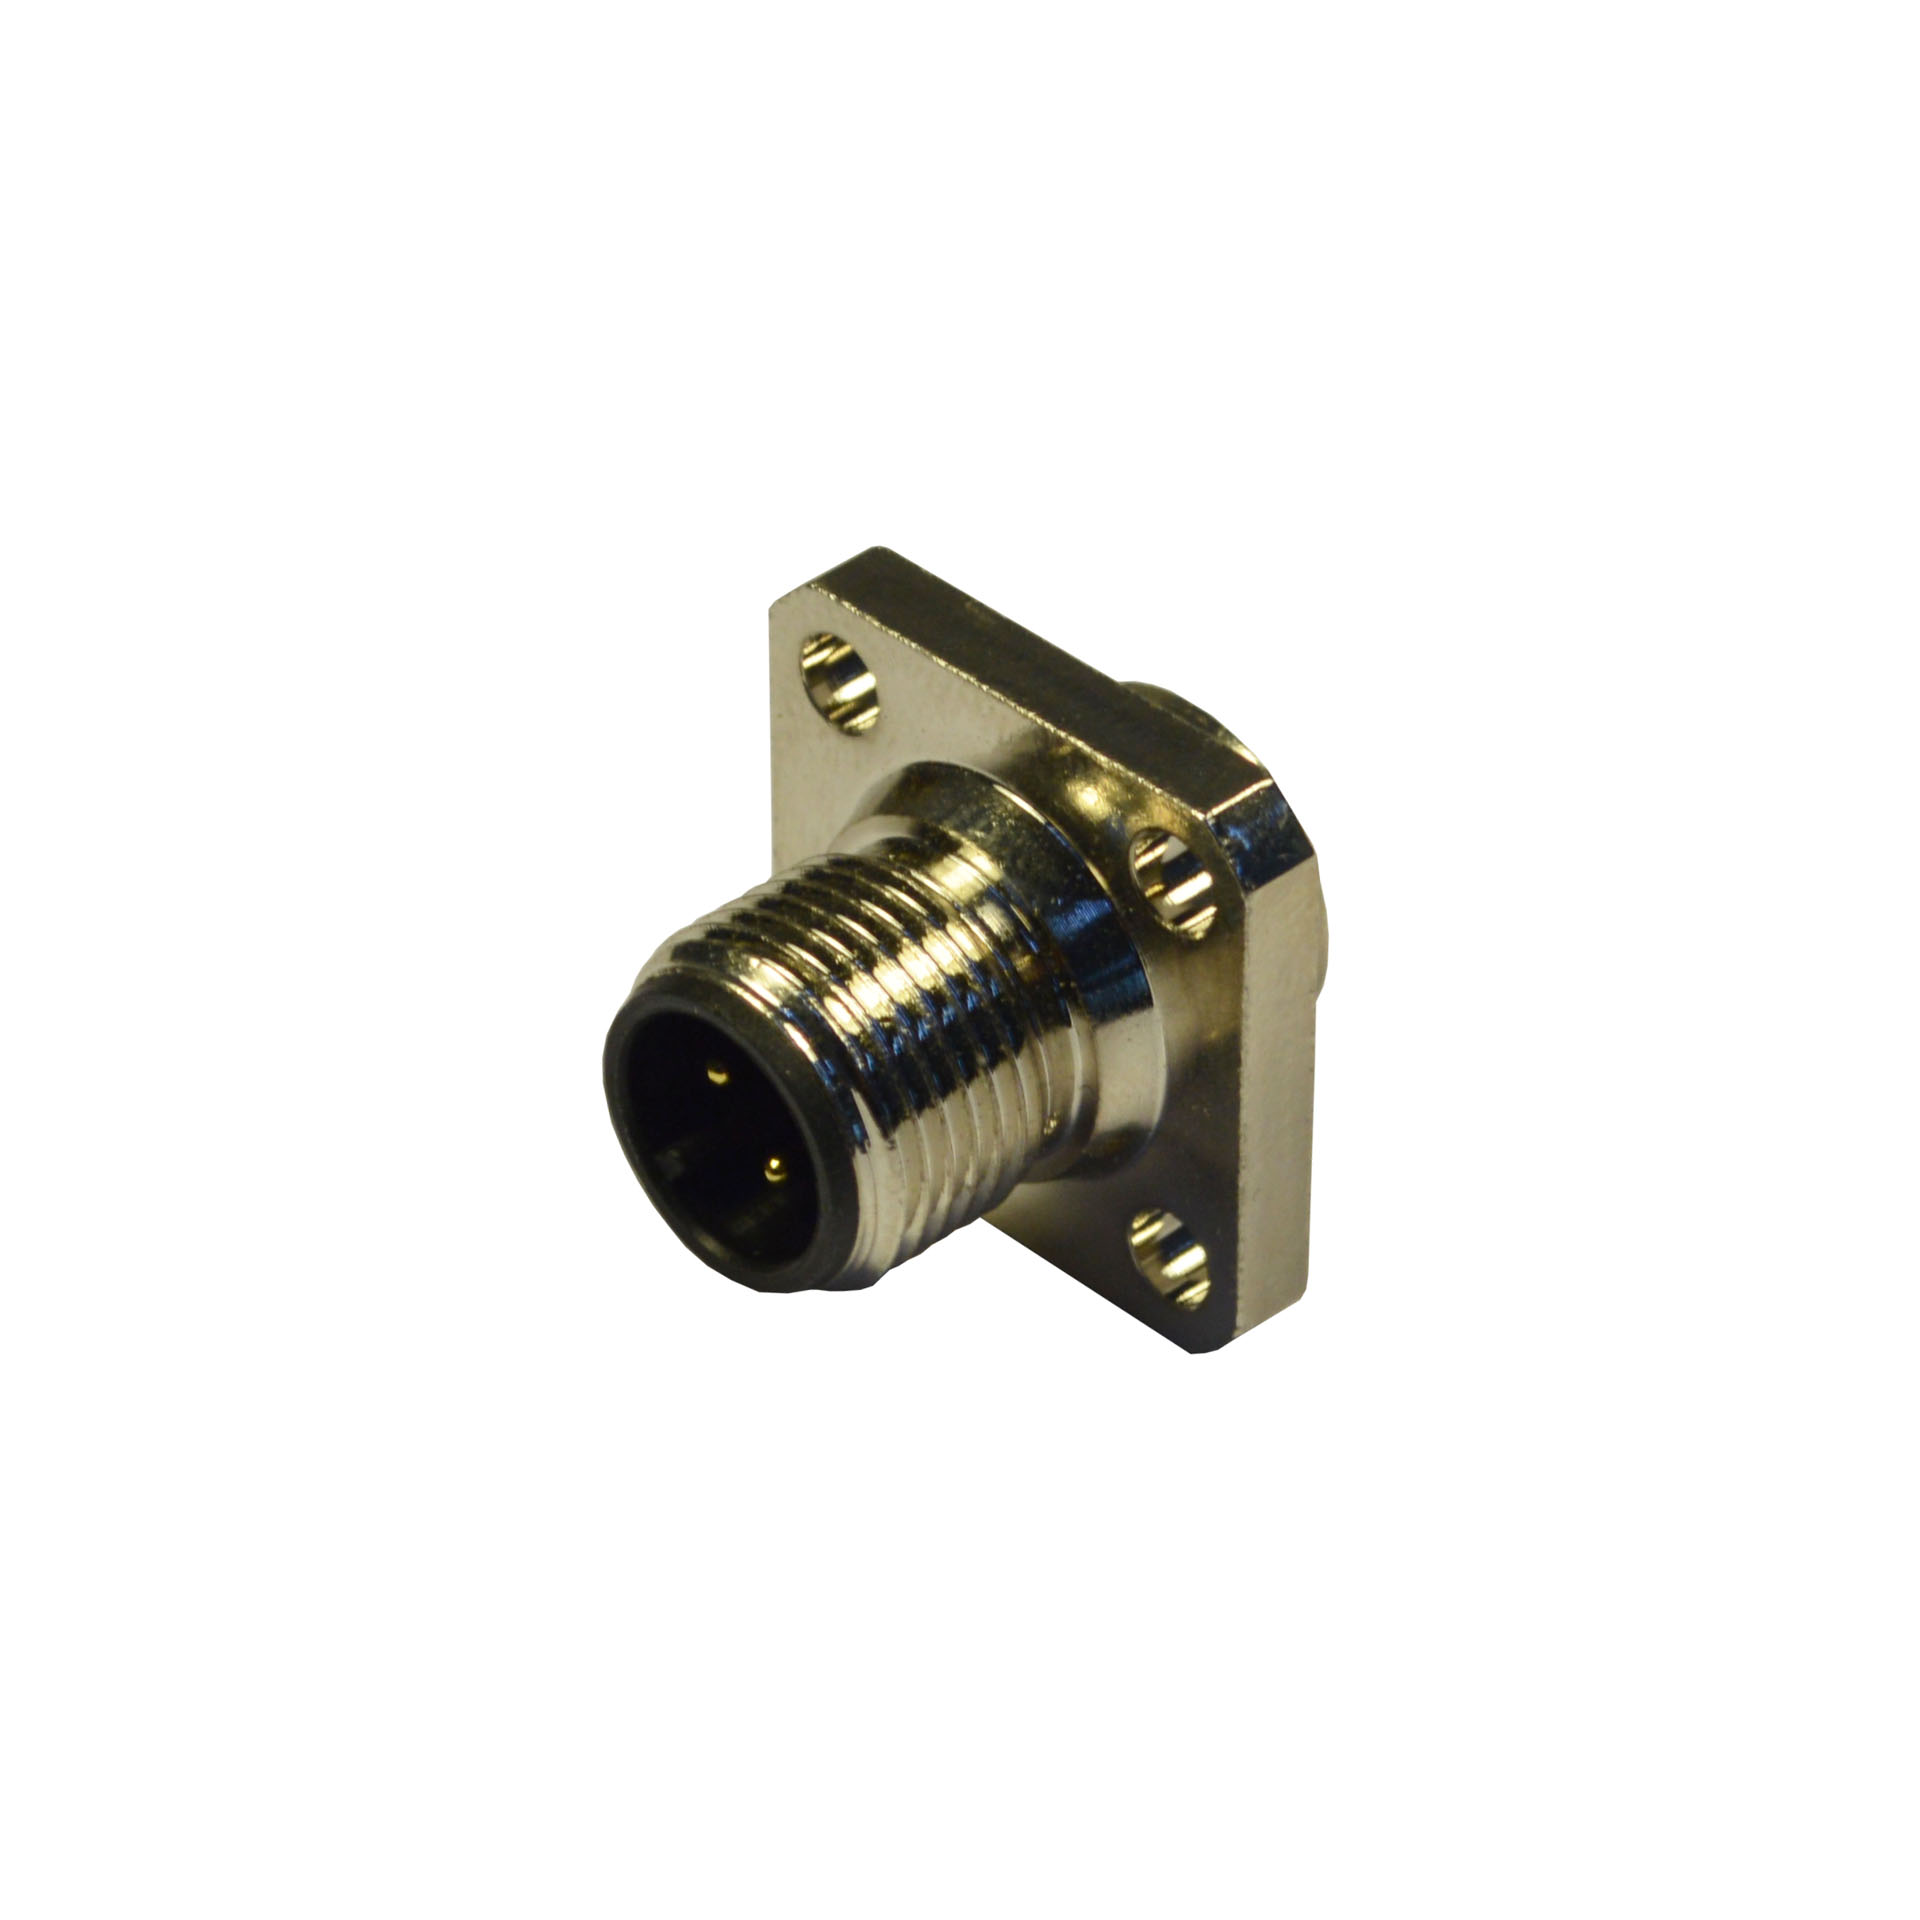 M12 to panel,male,frontal mounting with square flange 20x20mm,4p.,solder contacts